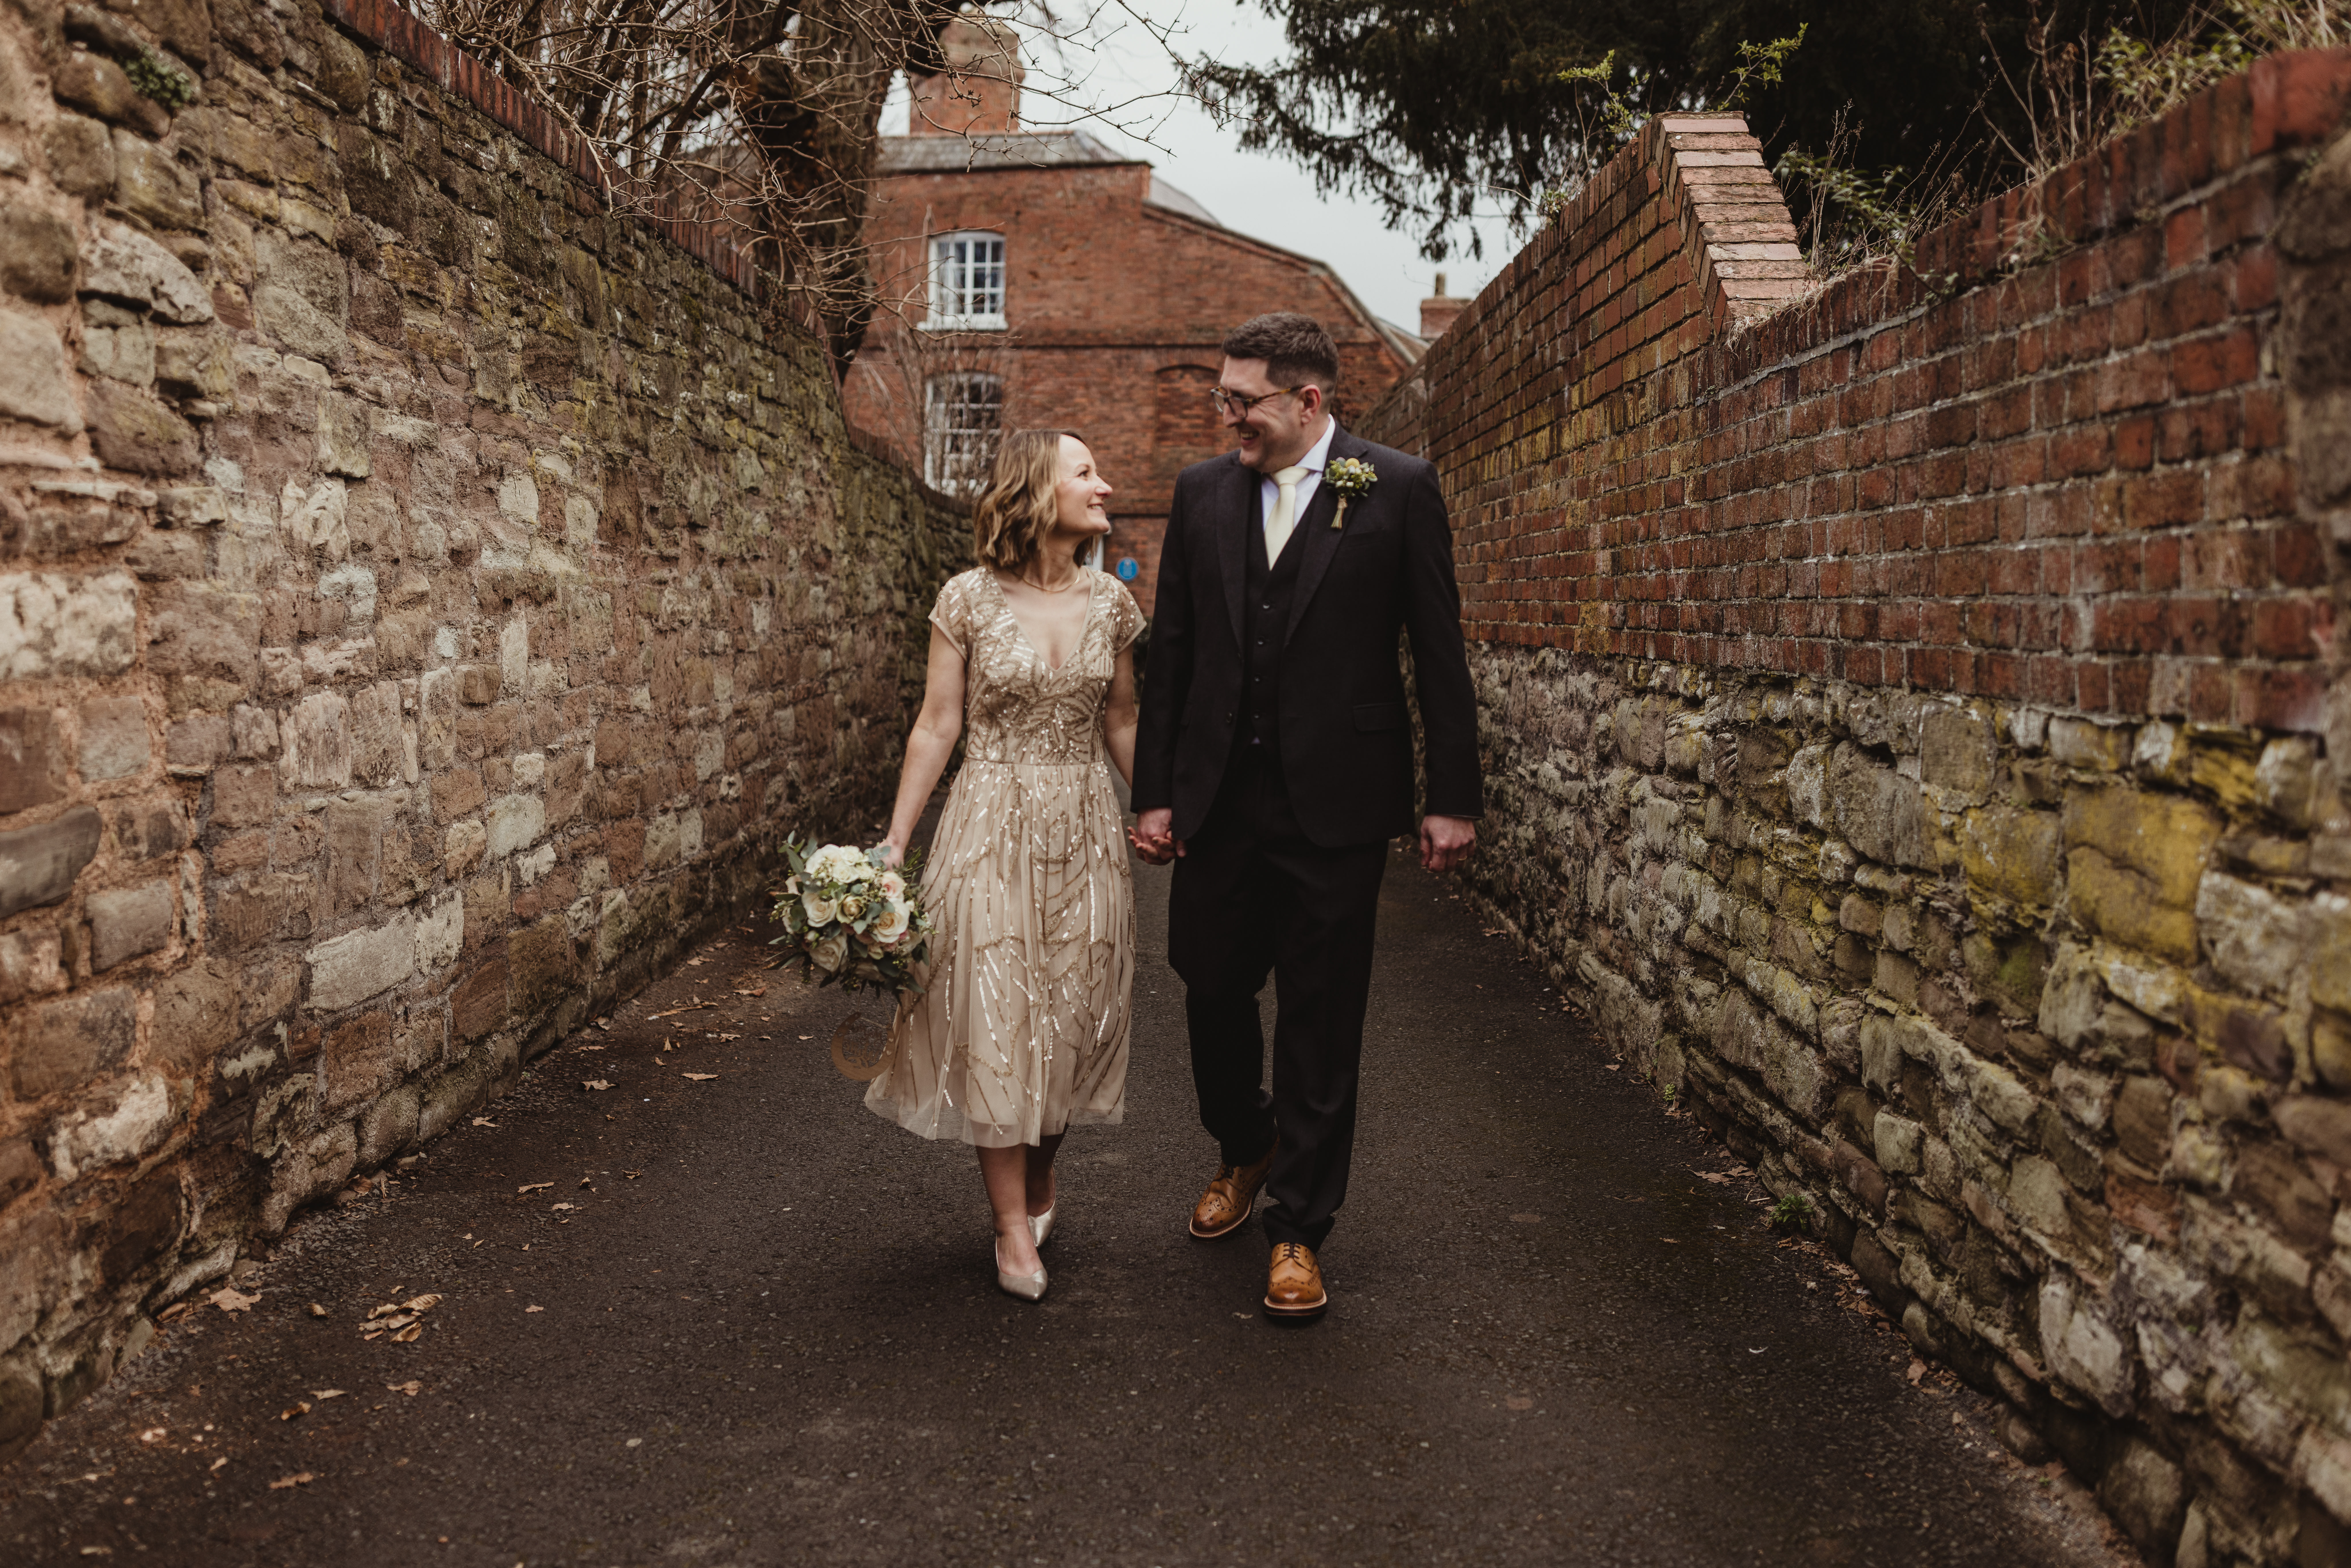 Wedding Photographer - Hereford - Town Hall - Couples Portrait